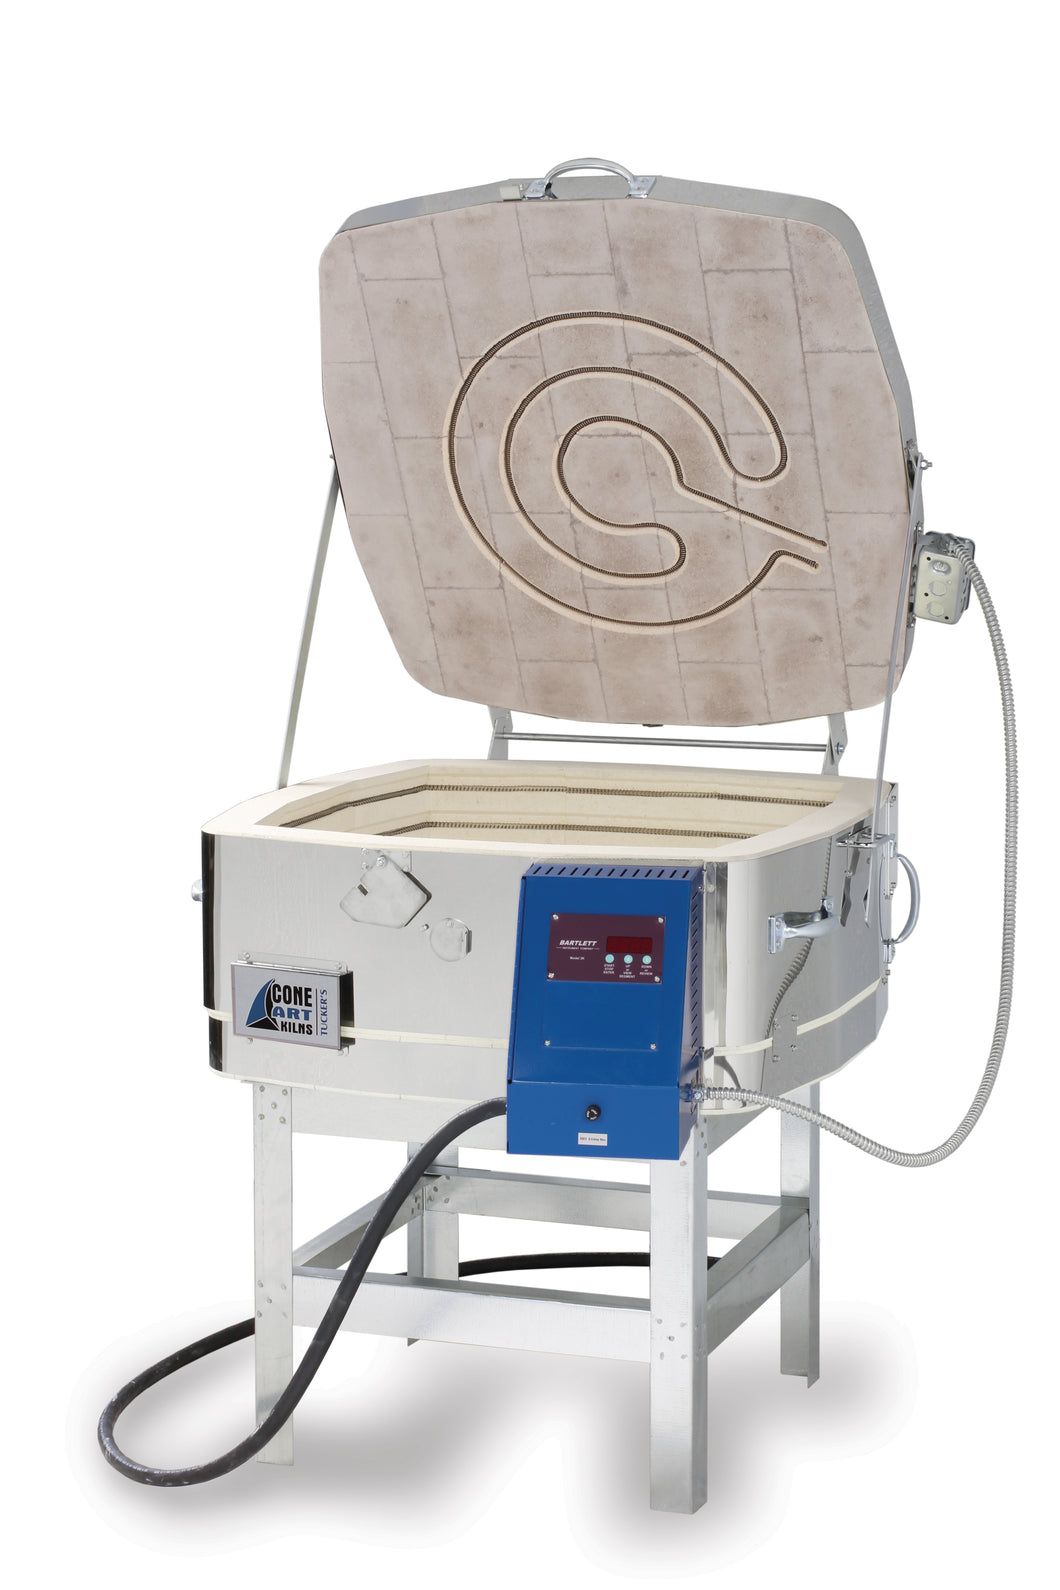 Tuckers Cone Art 2309G square glass kiln is a versatile model capable of firing many small pieces or individual large platters.